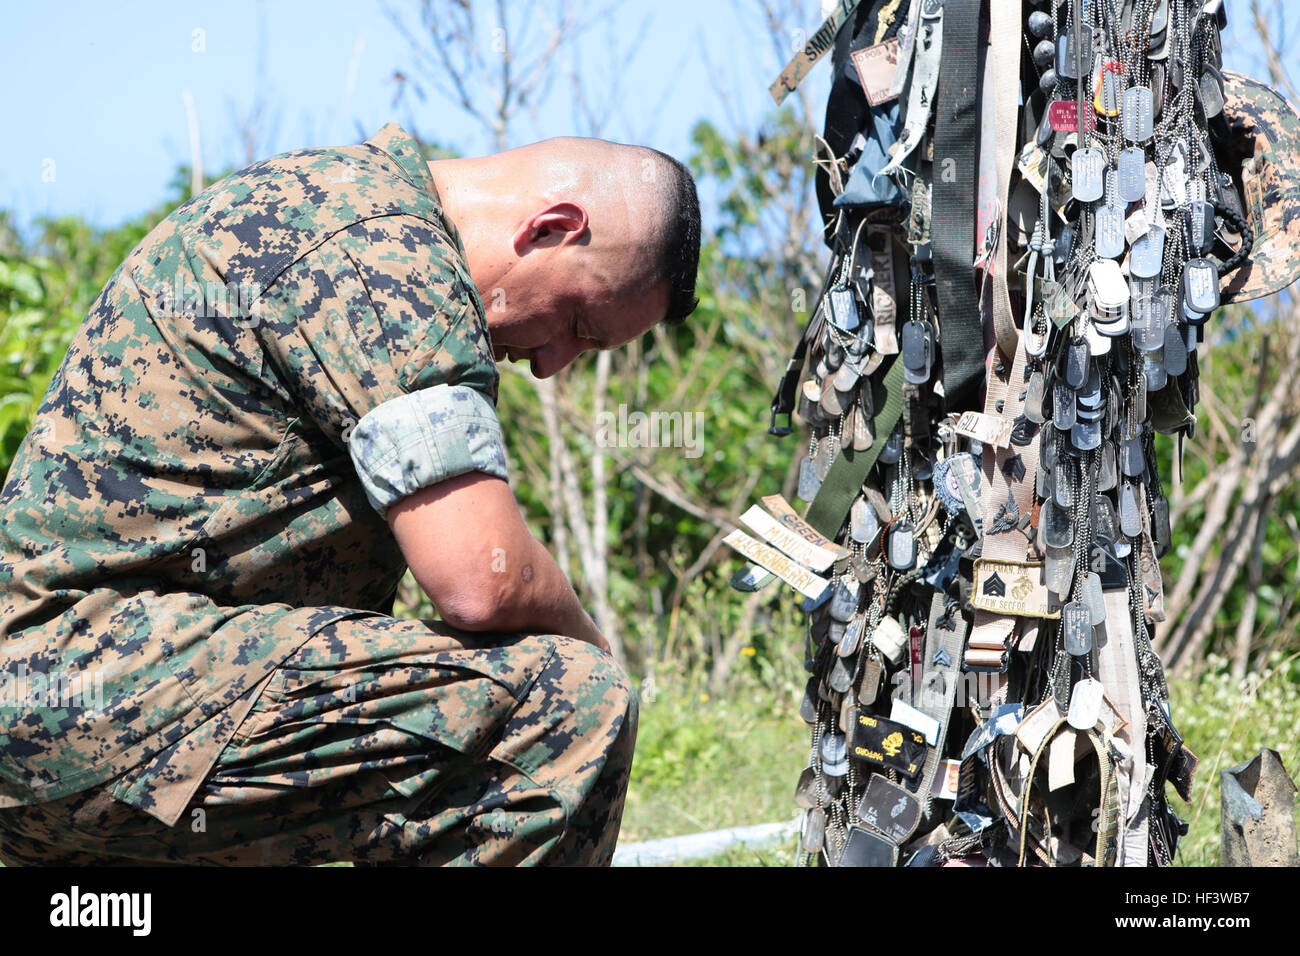 U.S. Marine Corps Sergeant Major Mario A. Marquez , sergeant major,  1st Marine Aircraft Wing, kneels at a memorial to pay his respects atop Mount Suribachi at Iwo To, Japan, March 19, 2015. The Iwo Jima Reunion of Honor is an opportunity for Japanese and U.S. veterans and their families, dignitaries, leaders and service members from both nations to honor the battle while recognizing 71 years of peace and prosperity in the U.S. – Japanese alliance. (U.S. Marine Corps photo by MCIPAC Combat Camera Lance Cpl. Juan Esqueda / Released) Iwo Jima 71st Reunion of Honor 160319-M-JD520-046 Stock Photo